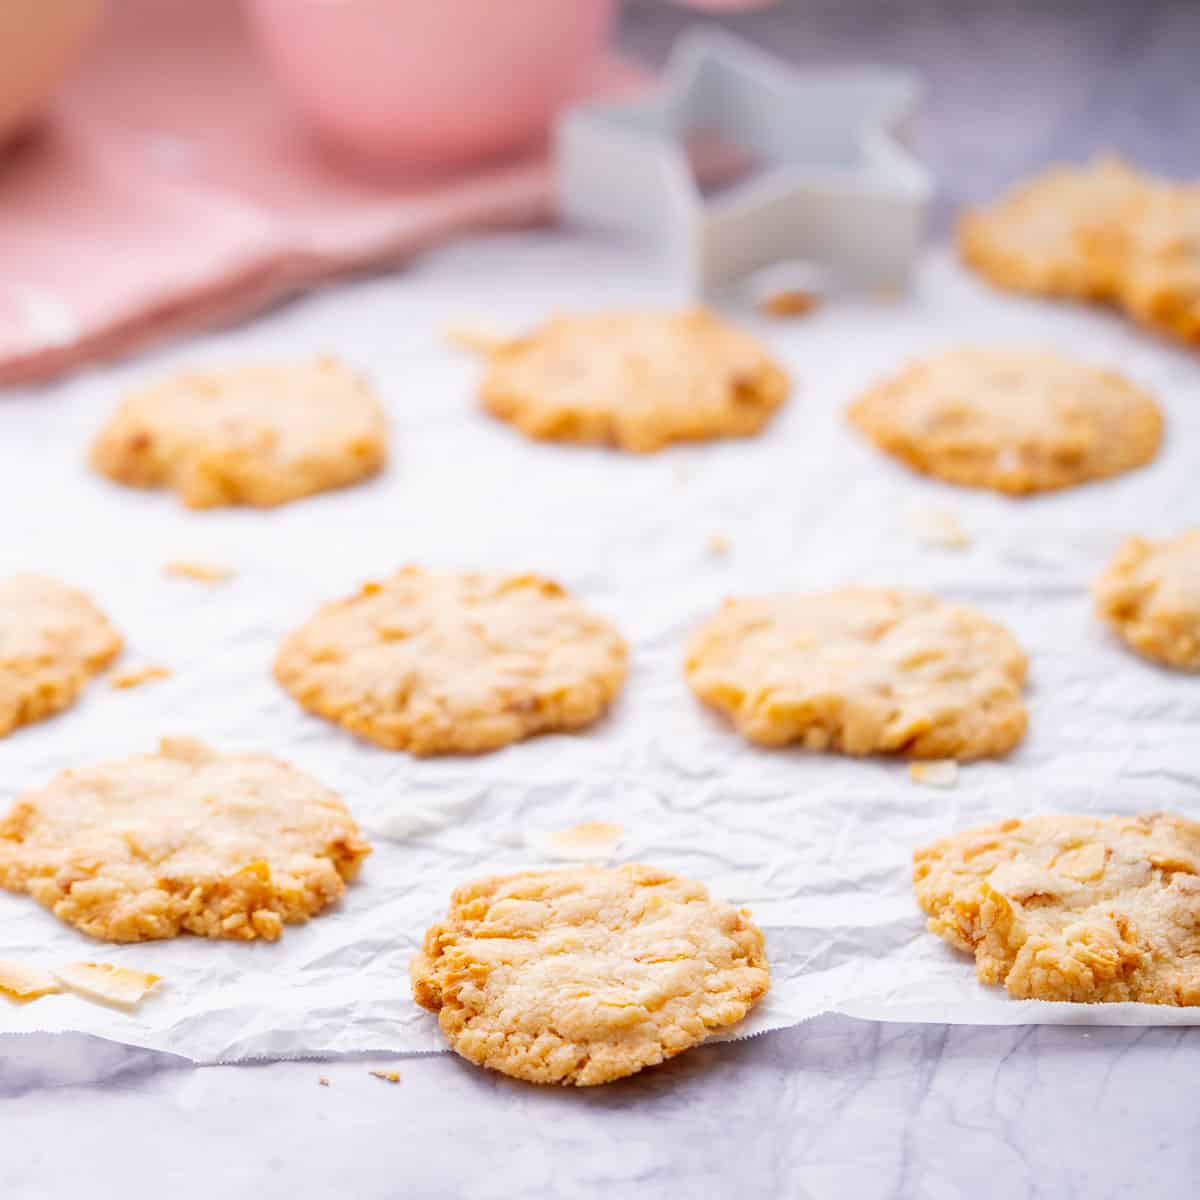 Baked Gluten Free Coconut Cookies sitting on crinkled baking paper on the bench